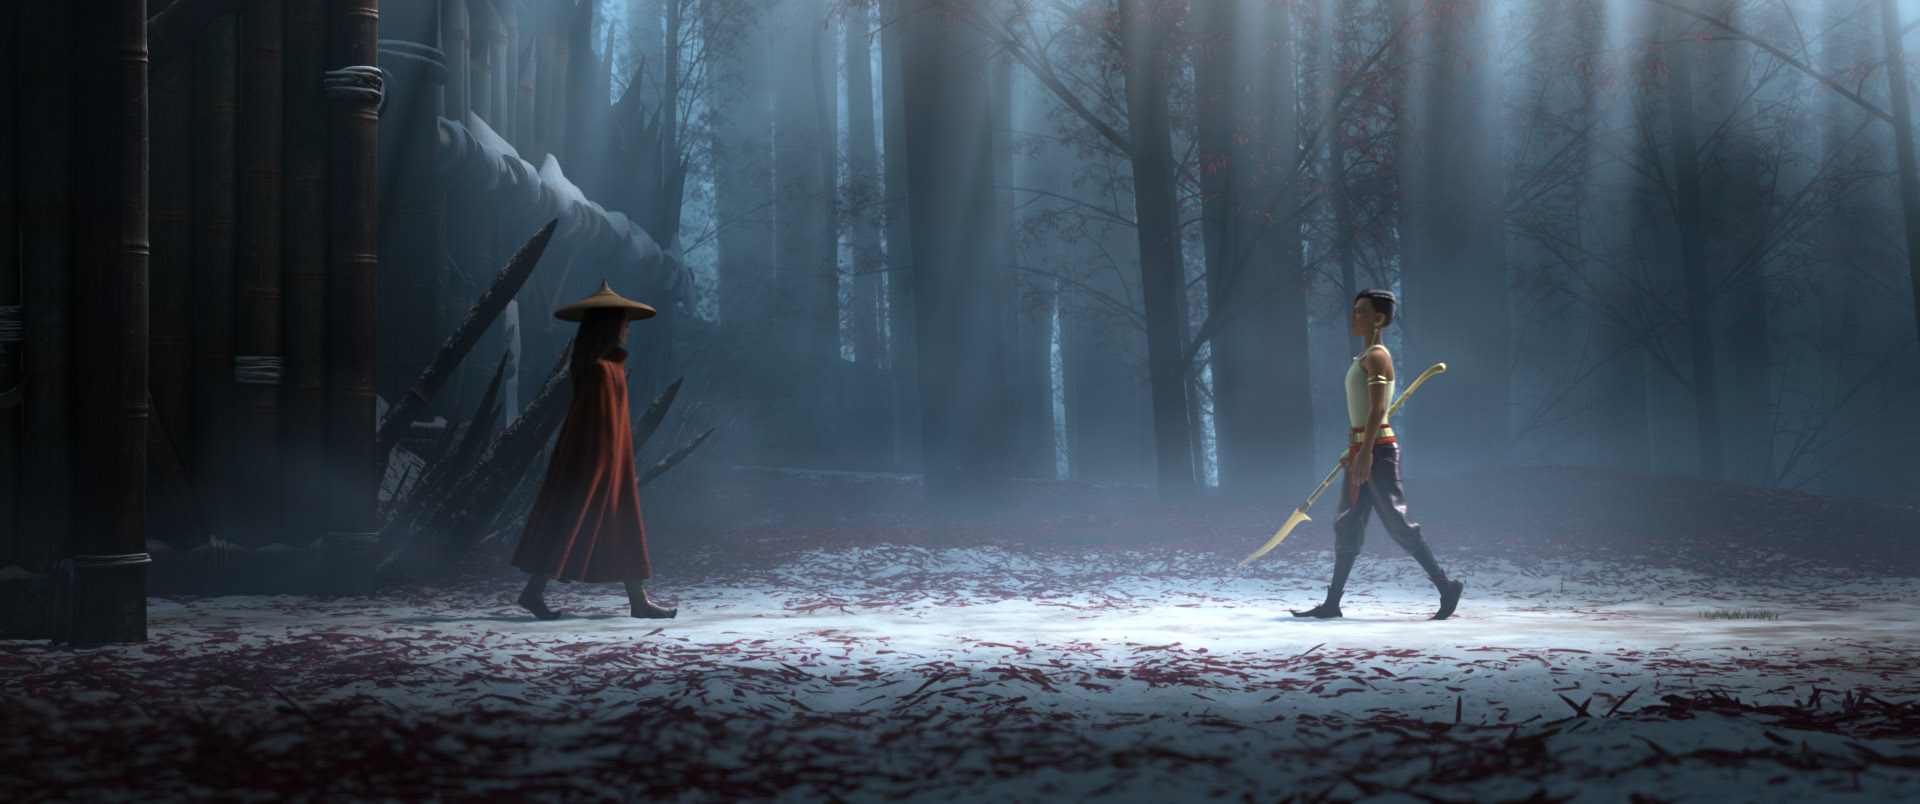 Raya and Namaari face off in the forest